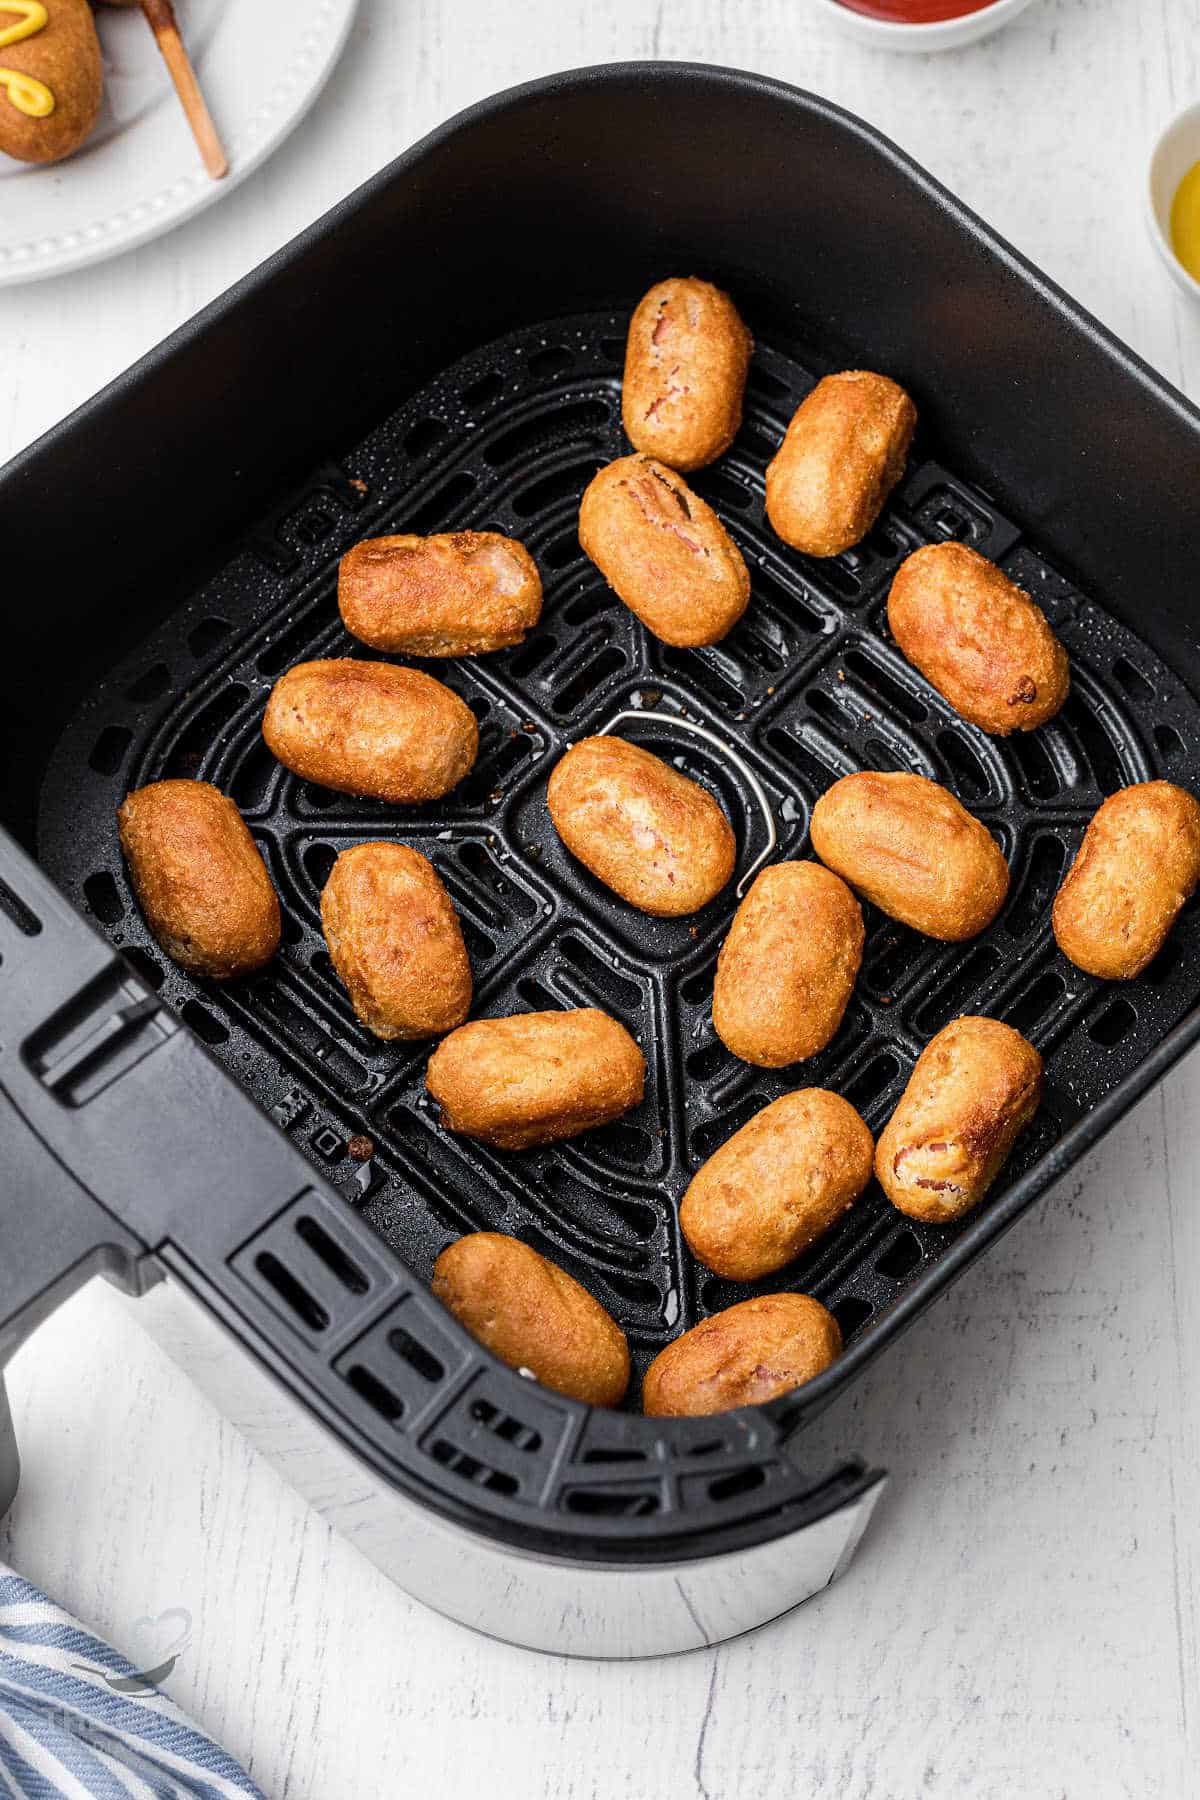 mini corn dogs laid out in a basket of an air fryer